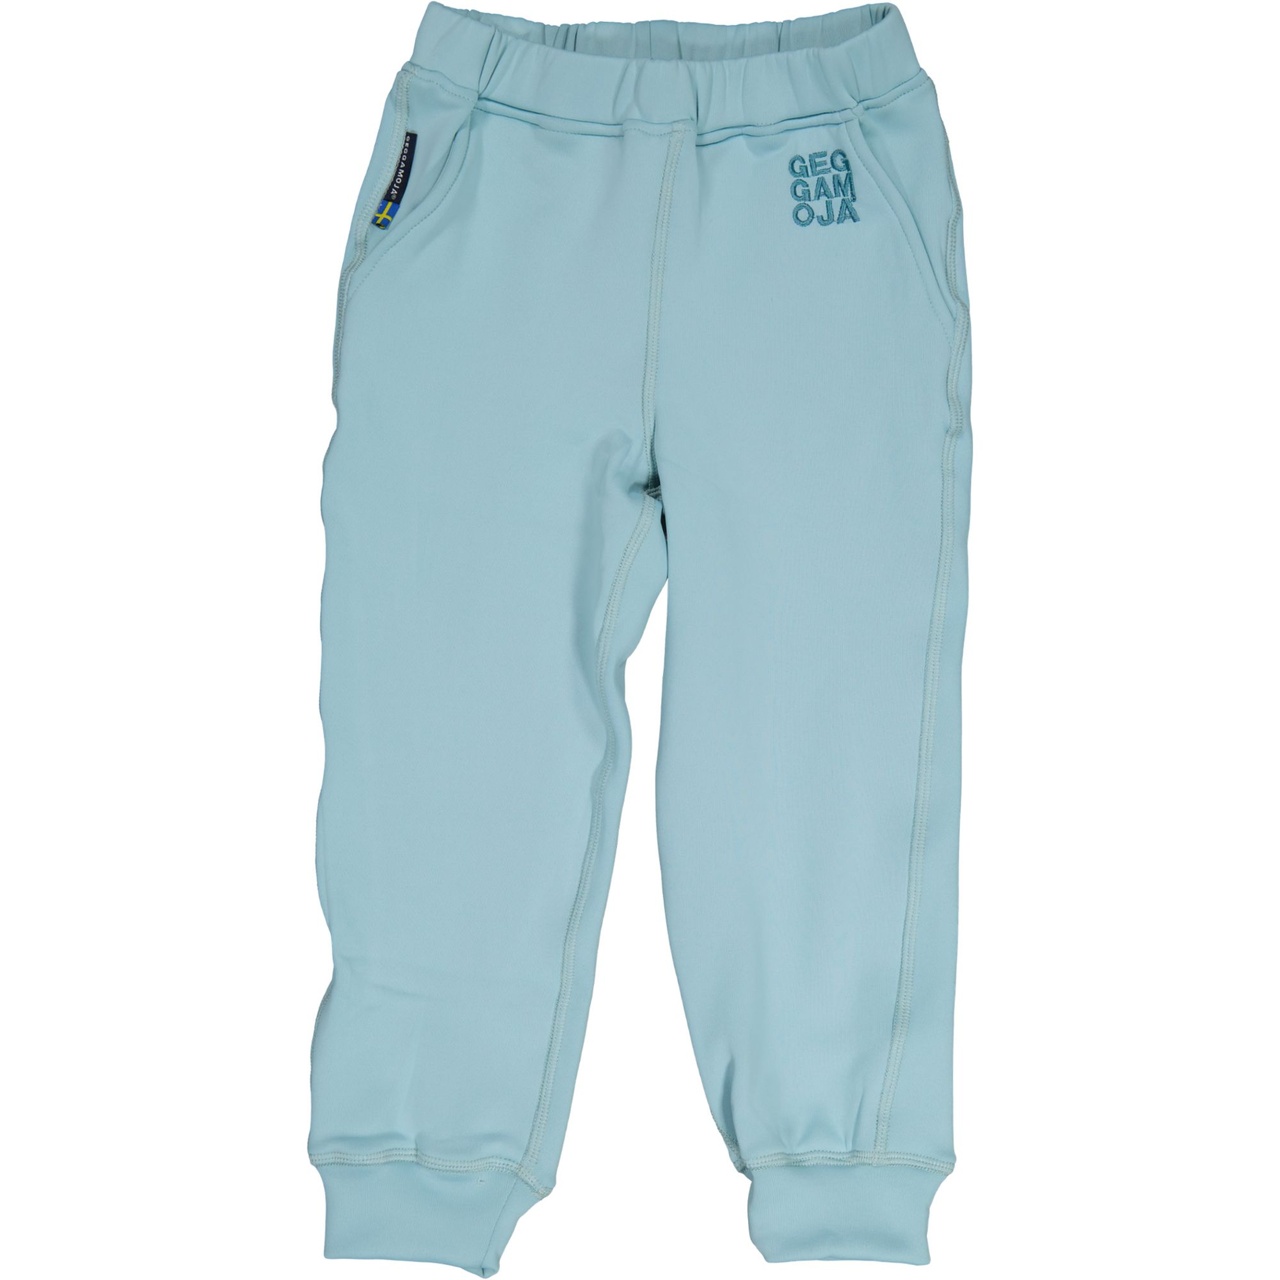 Stretch pant Turquoise 74/80